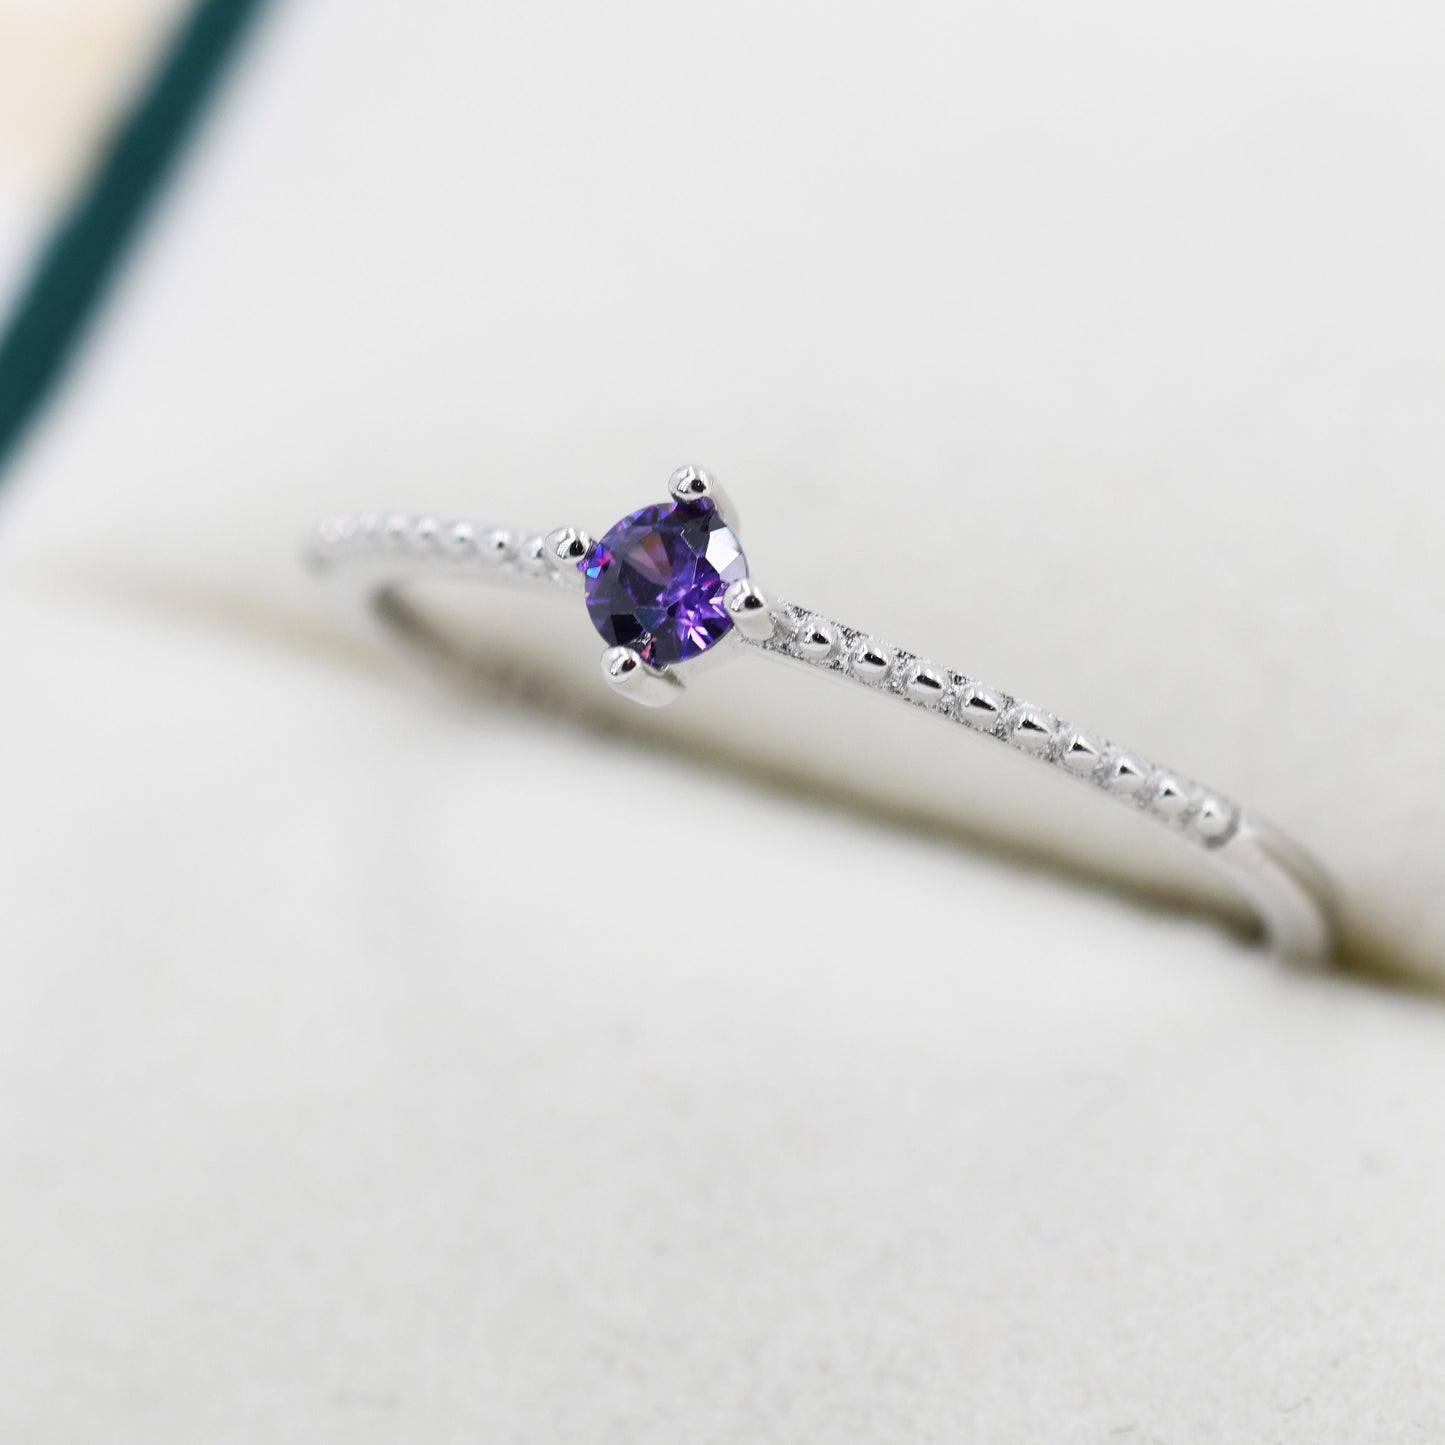 Purple Amethyst CZ Ring in Sterling Silver, Silver or Gold, Delicate Stacking Ring, Nesting Band, Size US 6 - 8,  February Birthstone